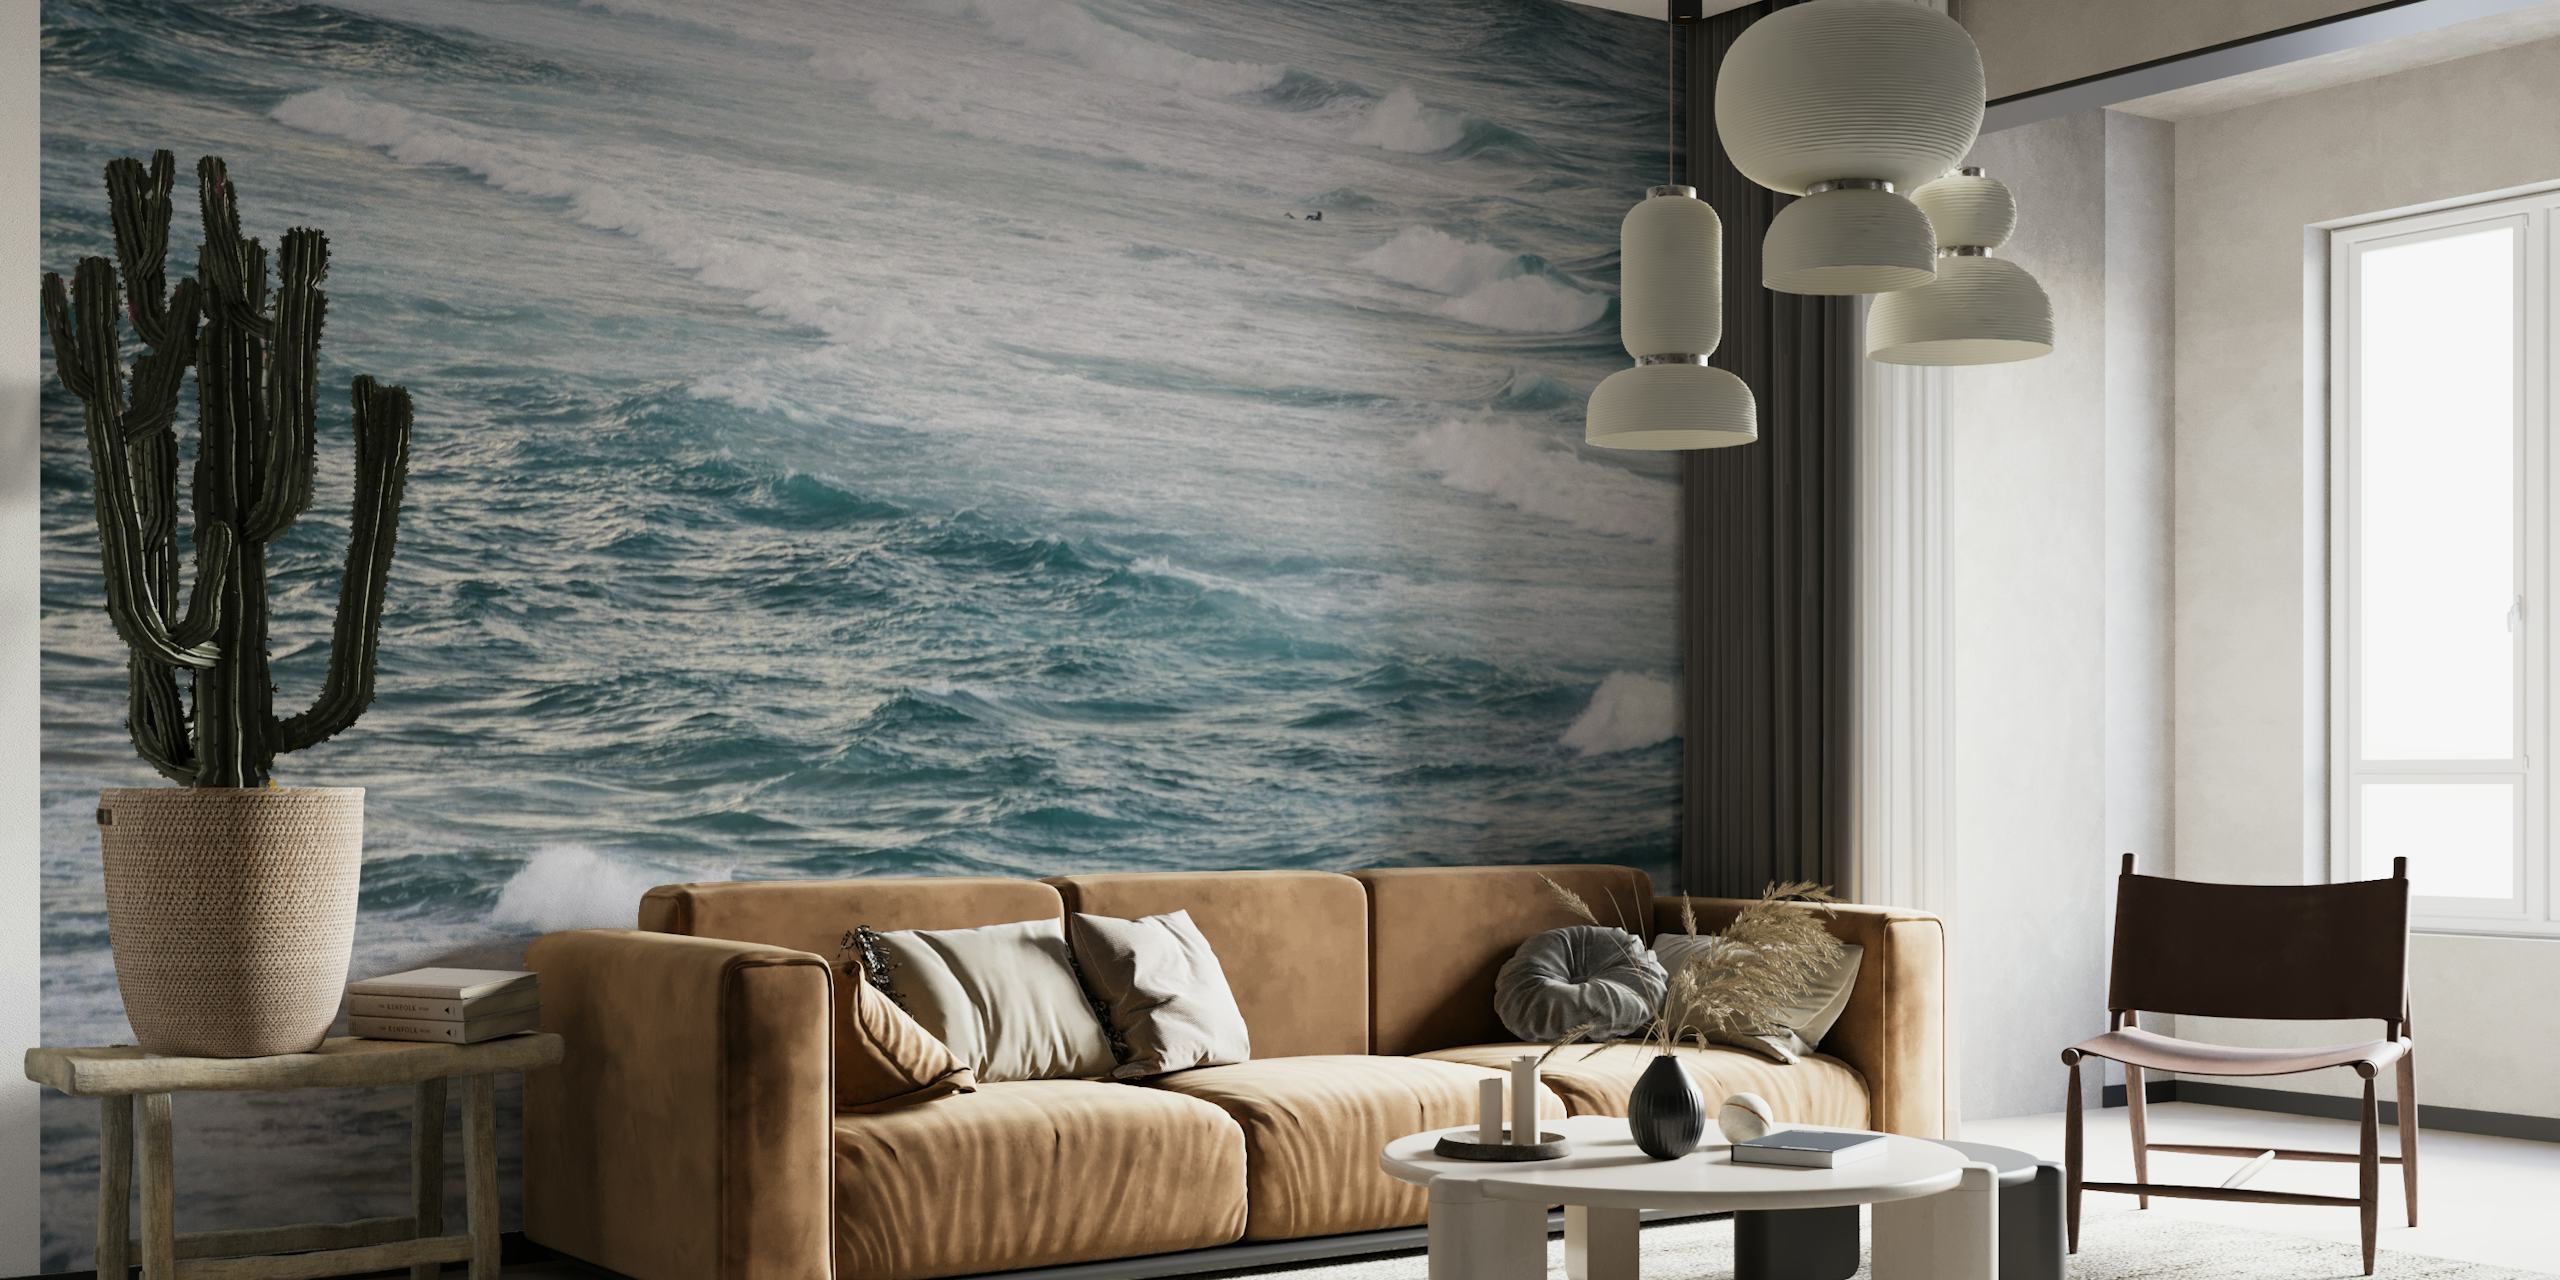 Winter Surfing VI wall mural depicting tumultuous winter ocean waves in shades of blue and grey.